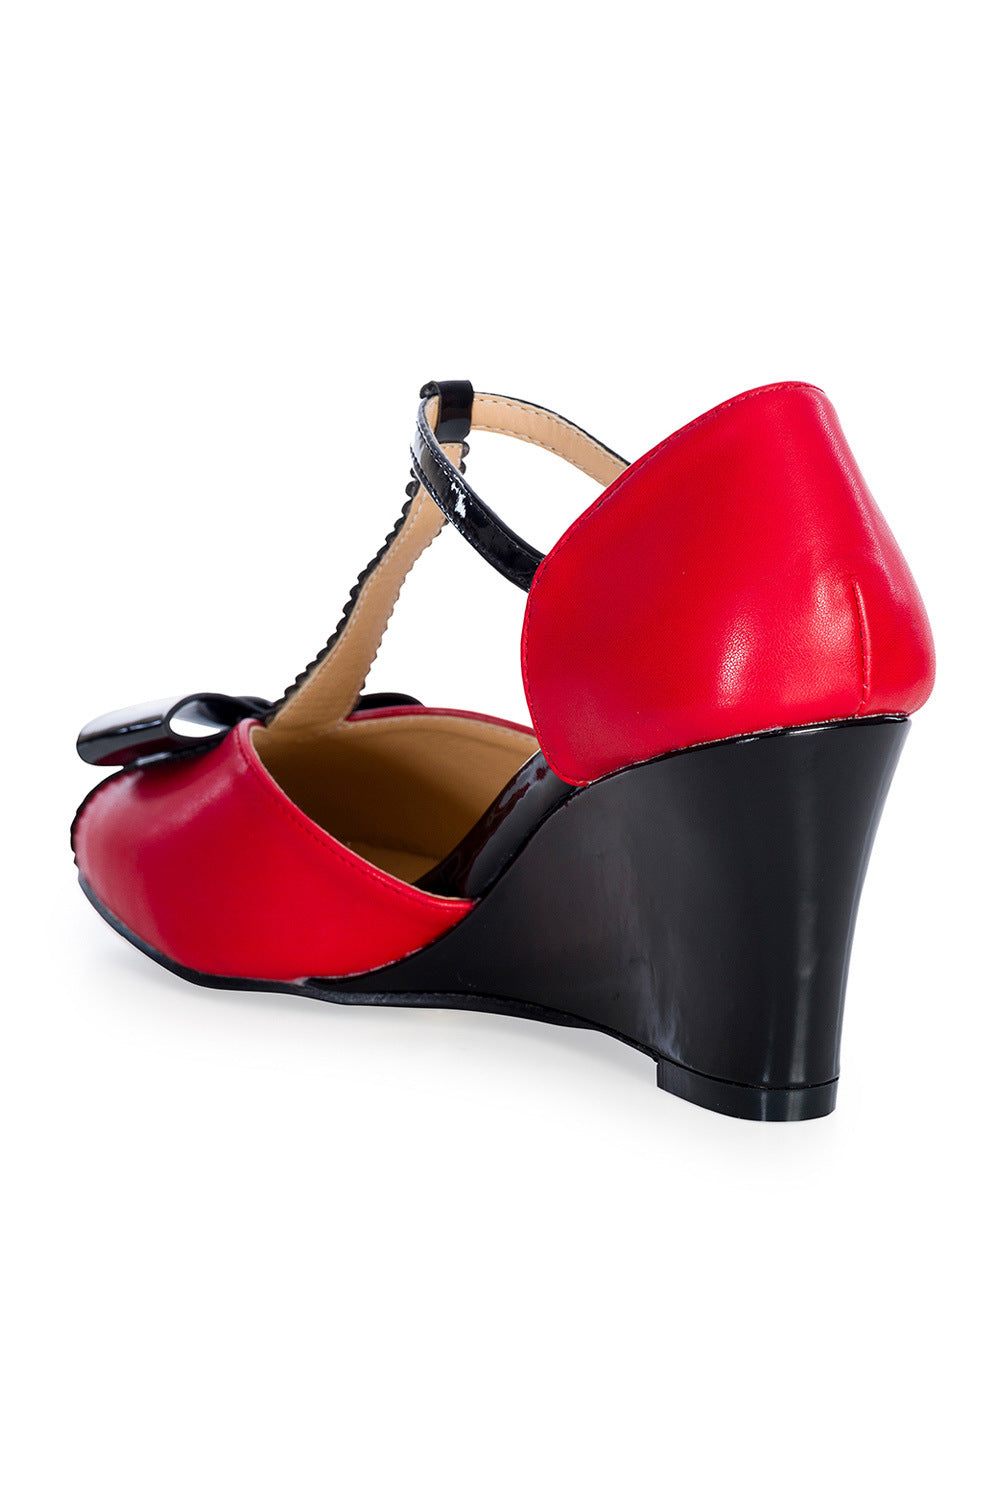 Bow Vixen Red/Black Wedges by Banned